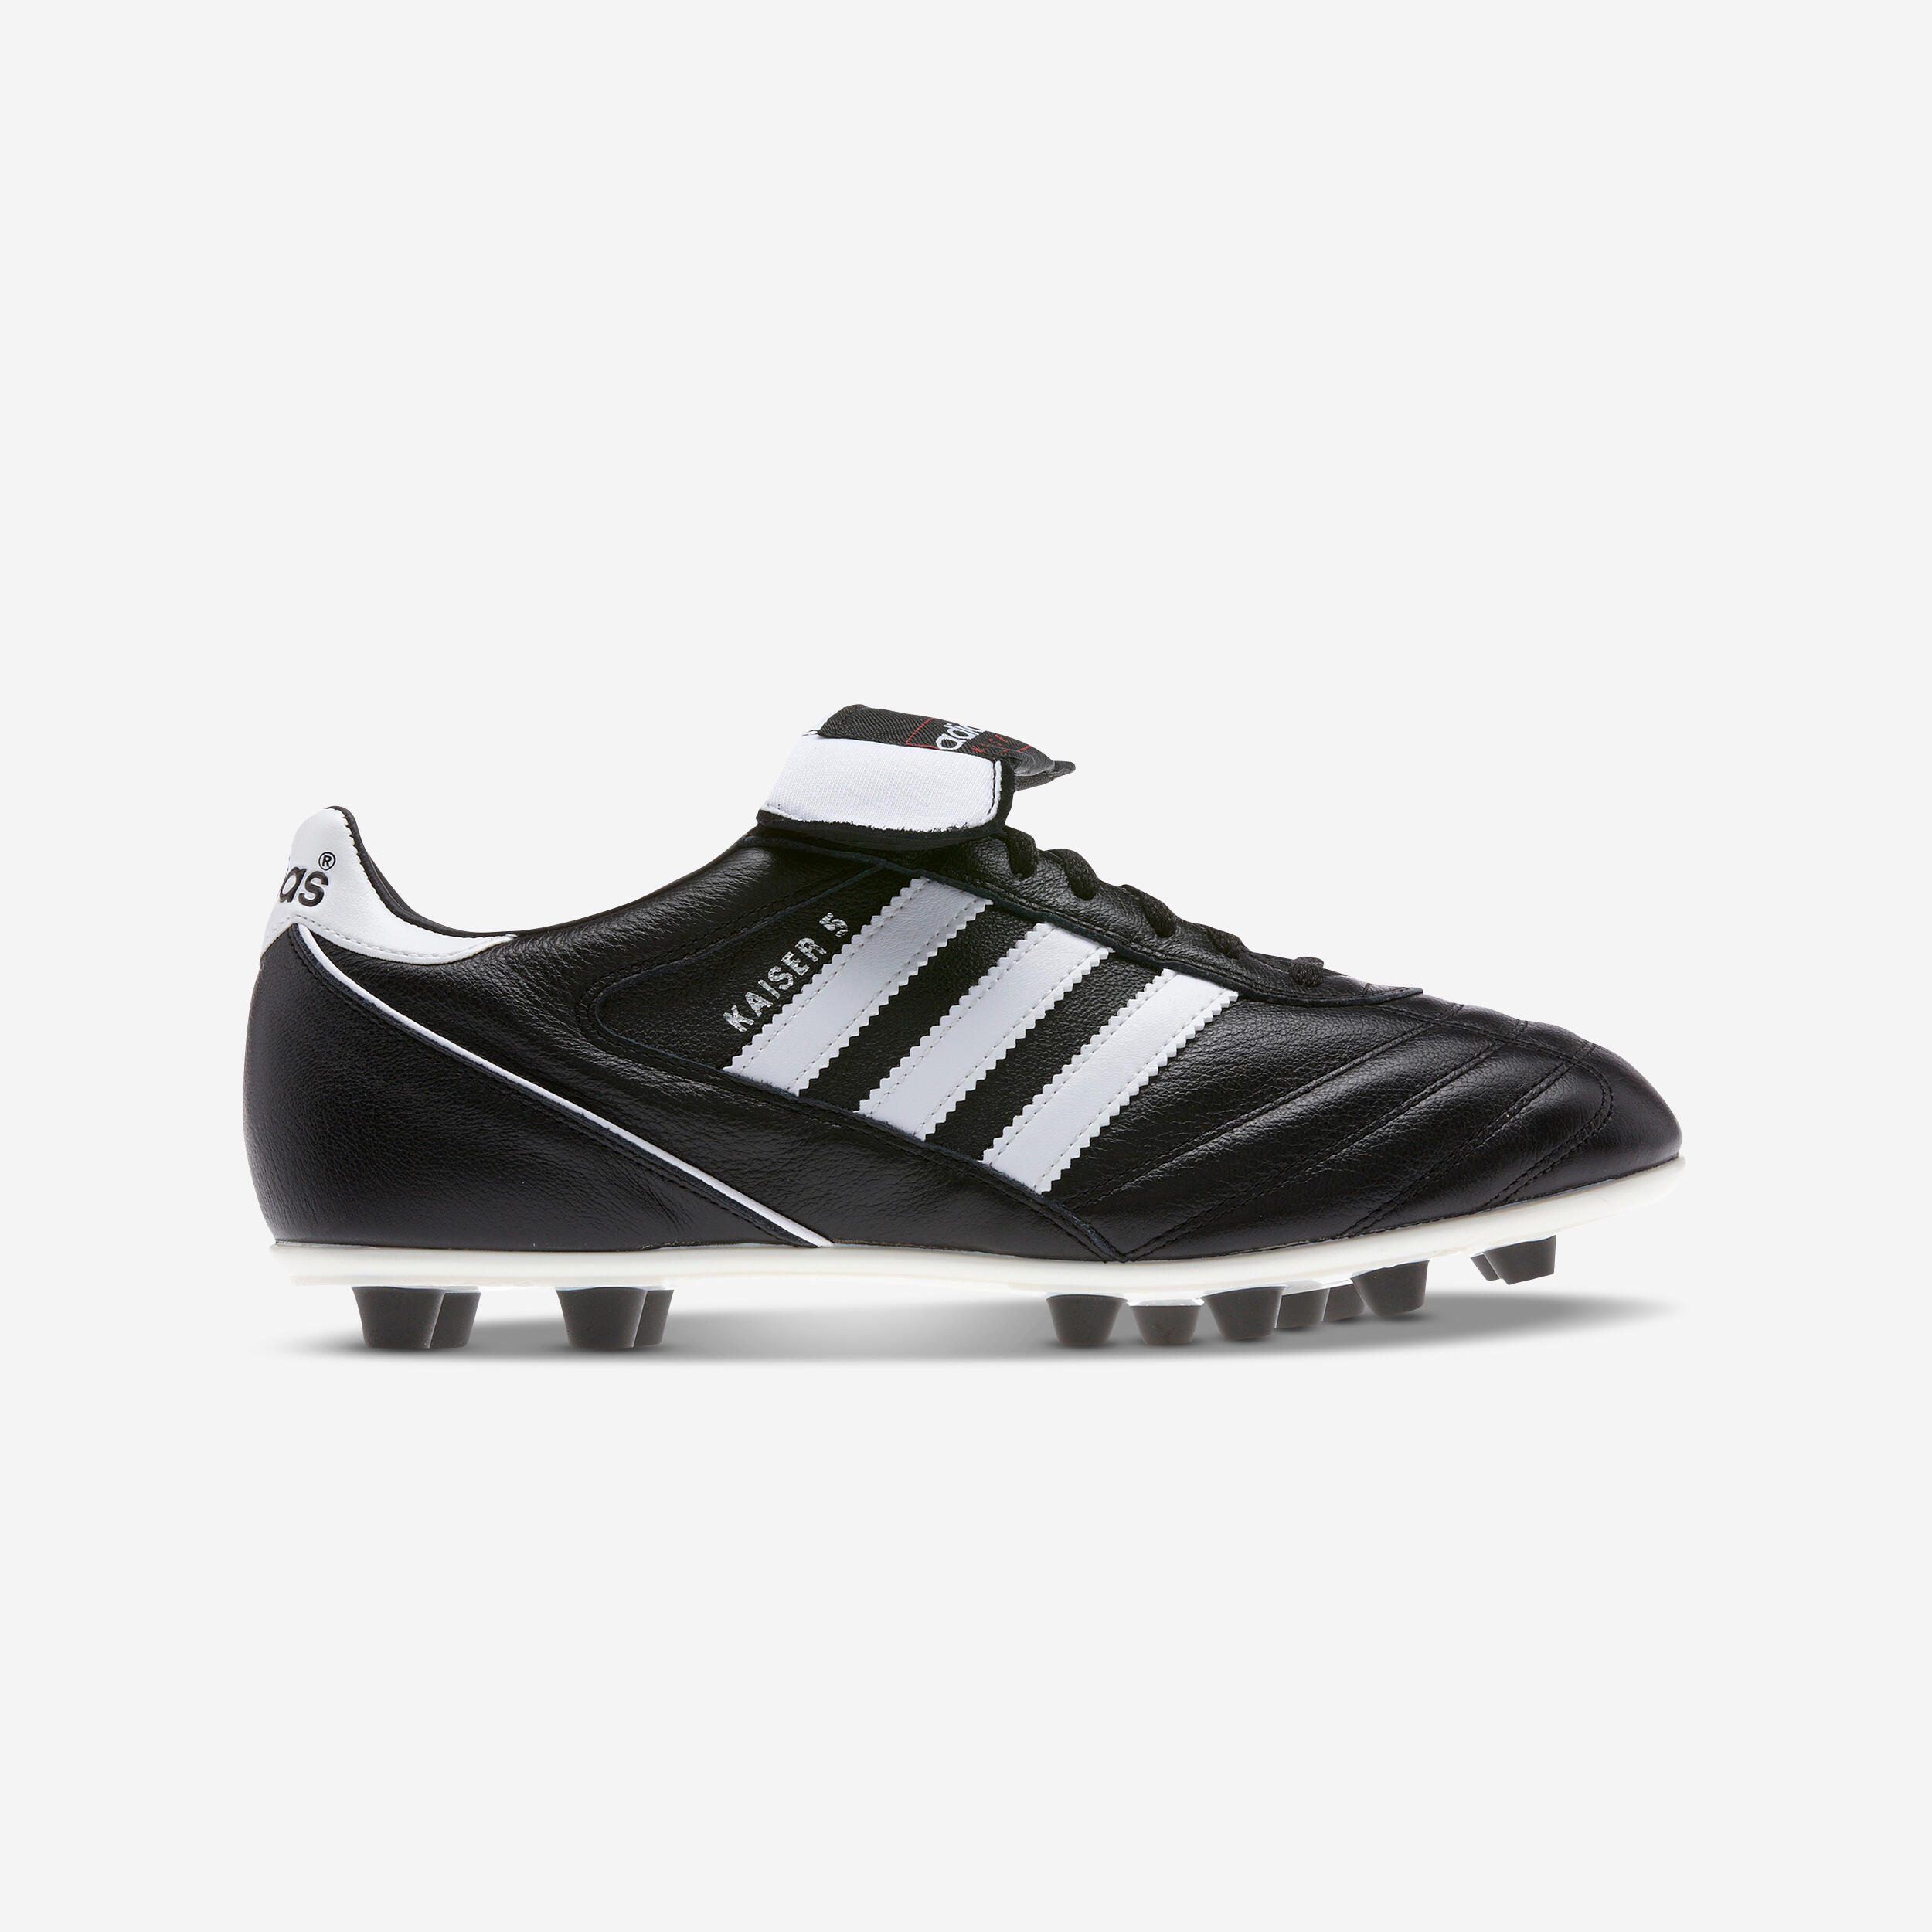 adidas kaiser 5 bianche,Limited Time Offer,aksharaconsultancy.com